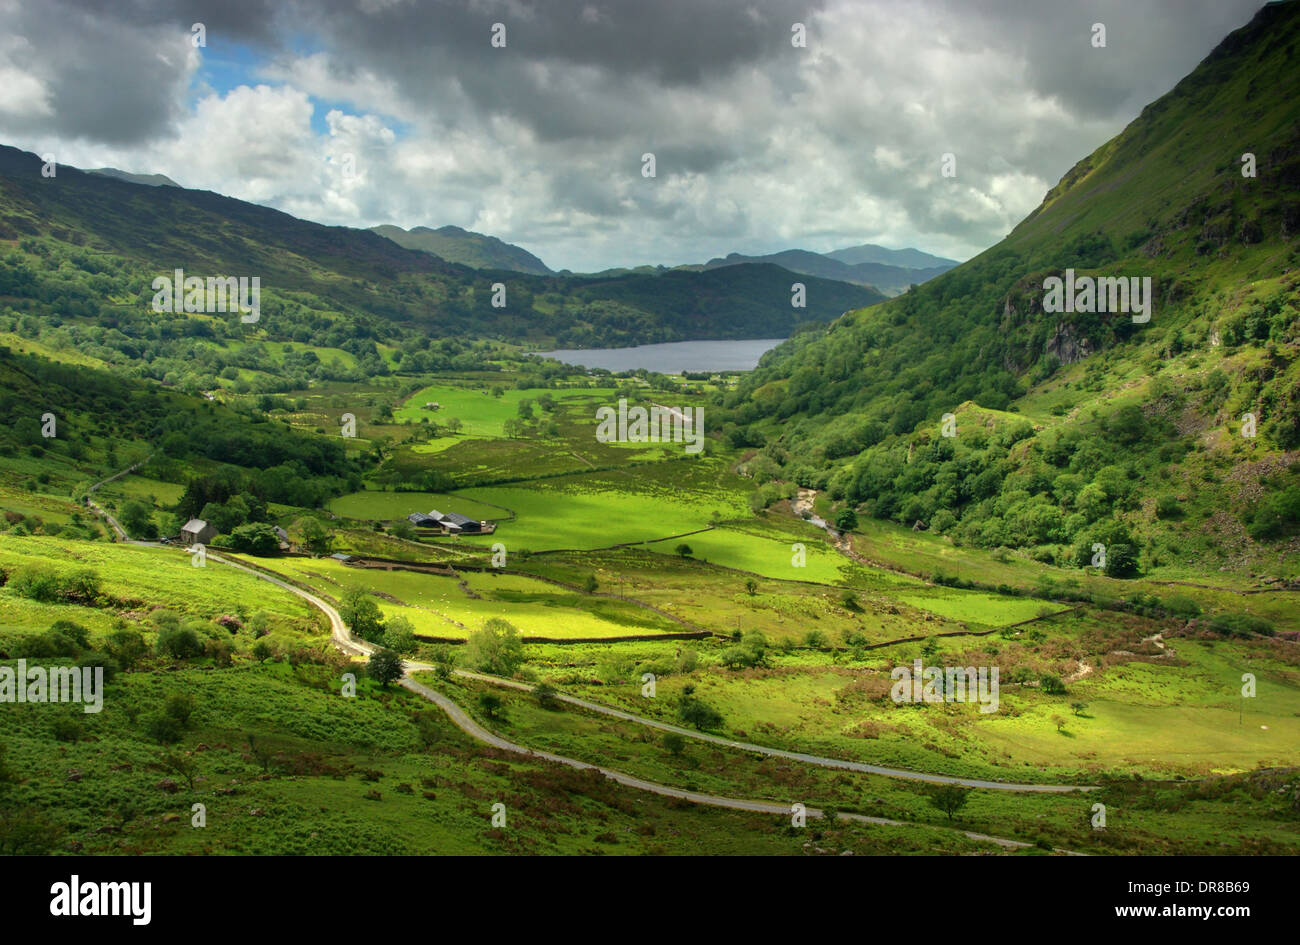 Welsh valley of Nant Gwynant in Snowdonia National Park, with Llyn Gwynant behind Stock Photo